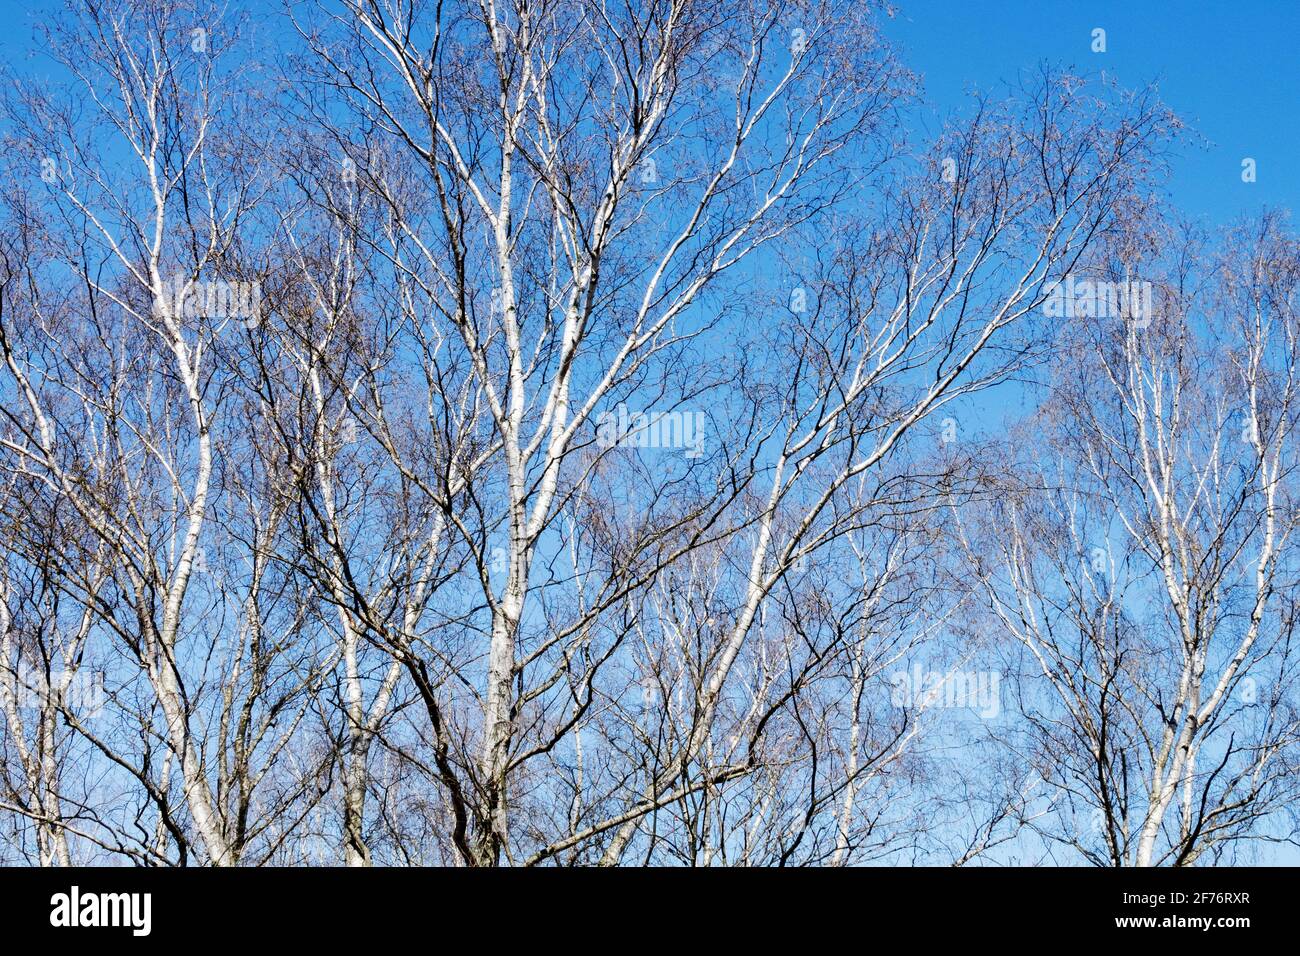 Silver birch trees, leafless trees against blue sky in early spring Stock Photo